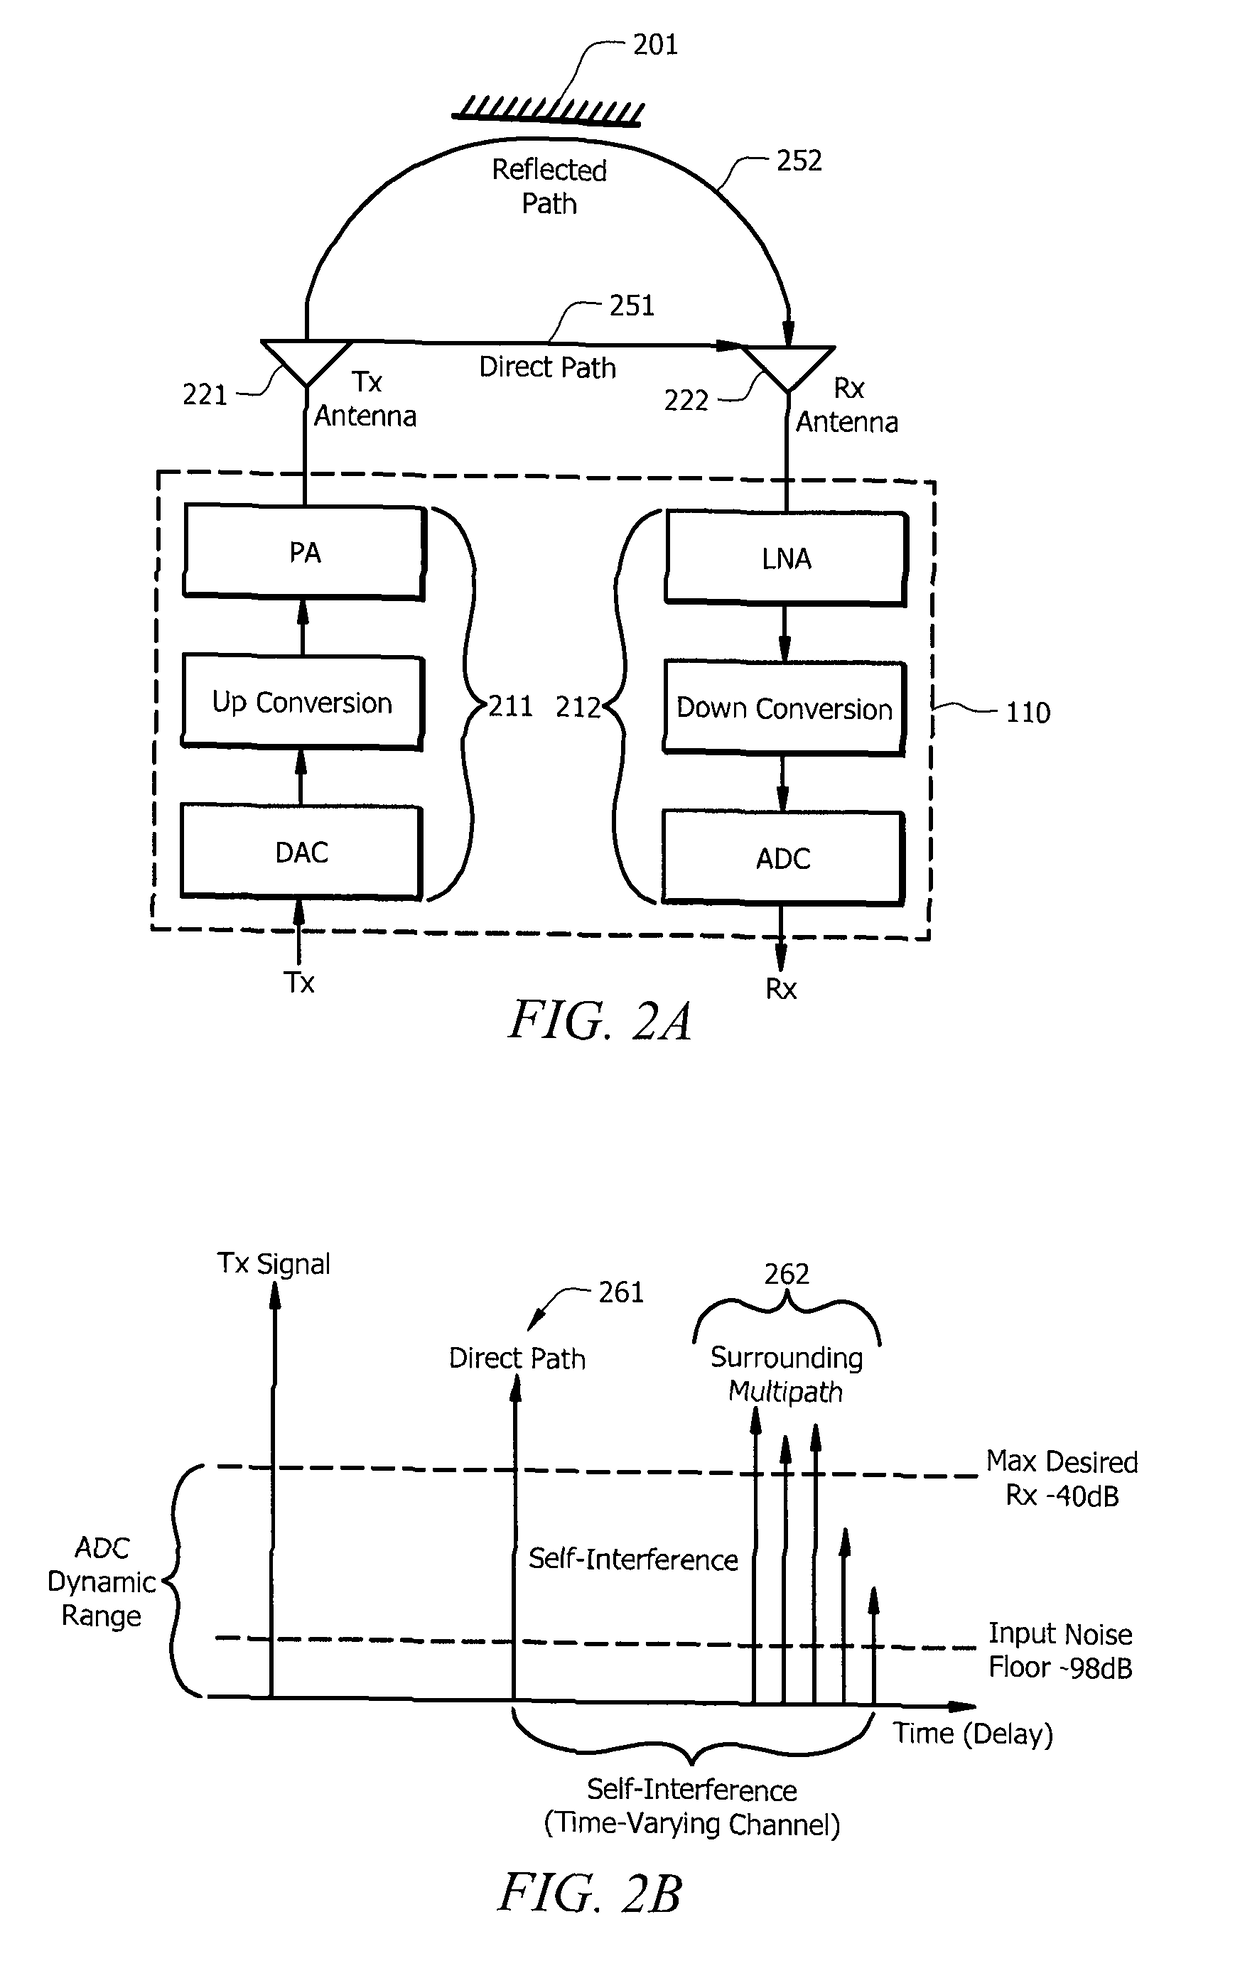 Systems and methods for mitigation of self-interference in spectrally efficient full duplex communications